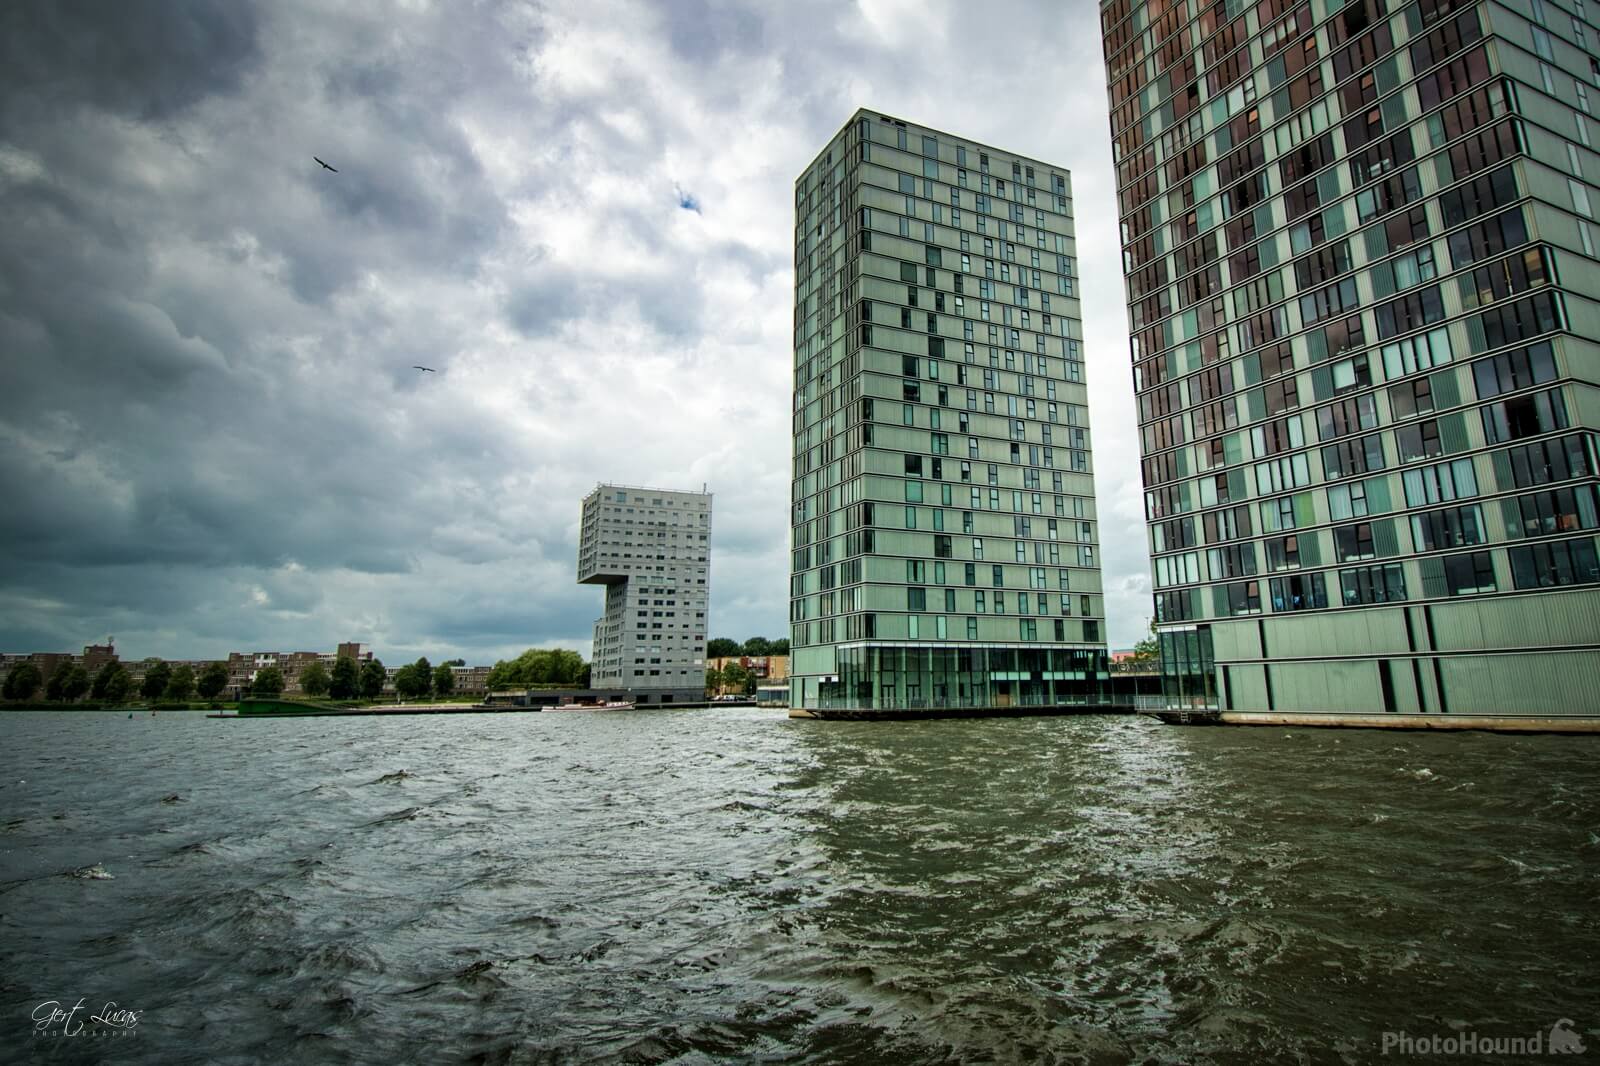 Image of Side By Side - Almere by Gert Lucas